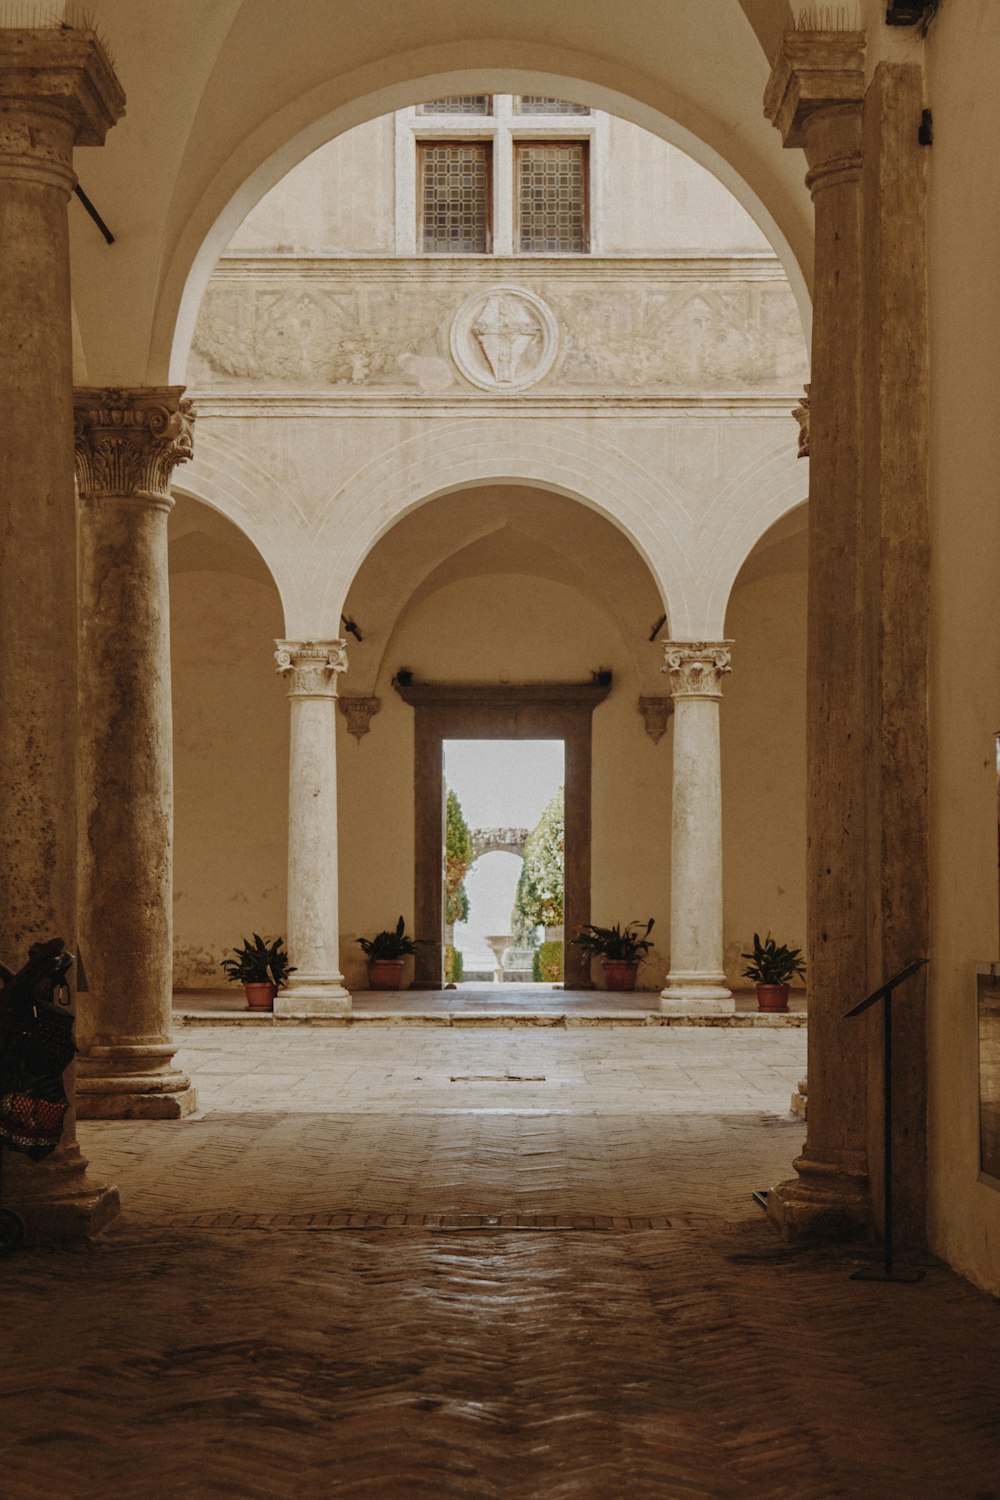 a hallway with columns and a clock on the wall